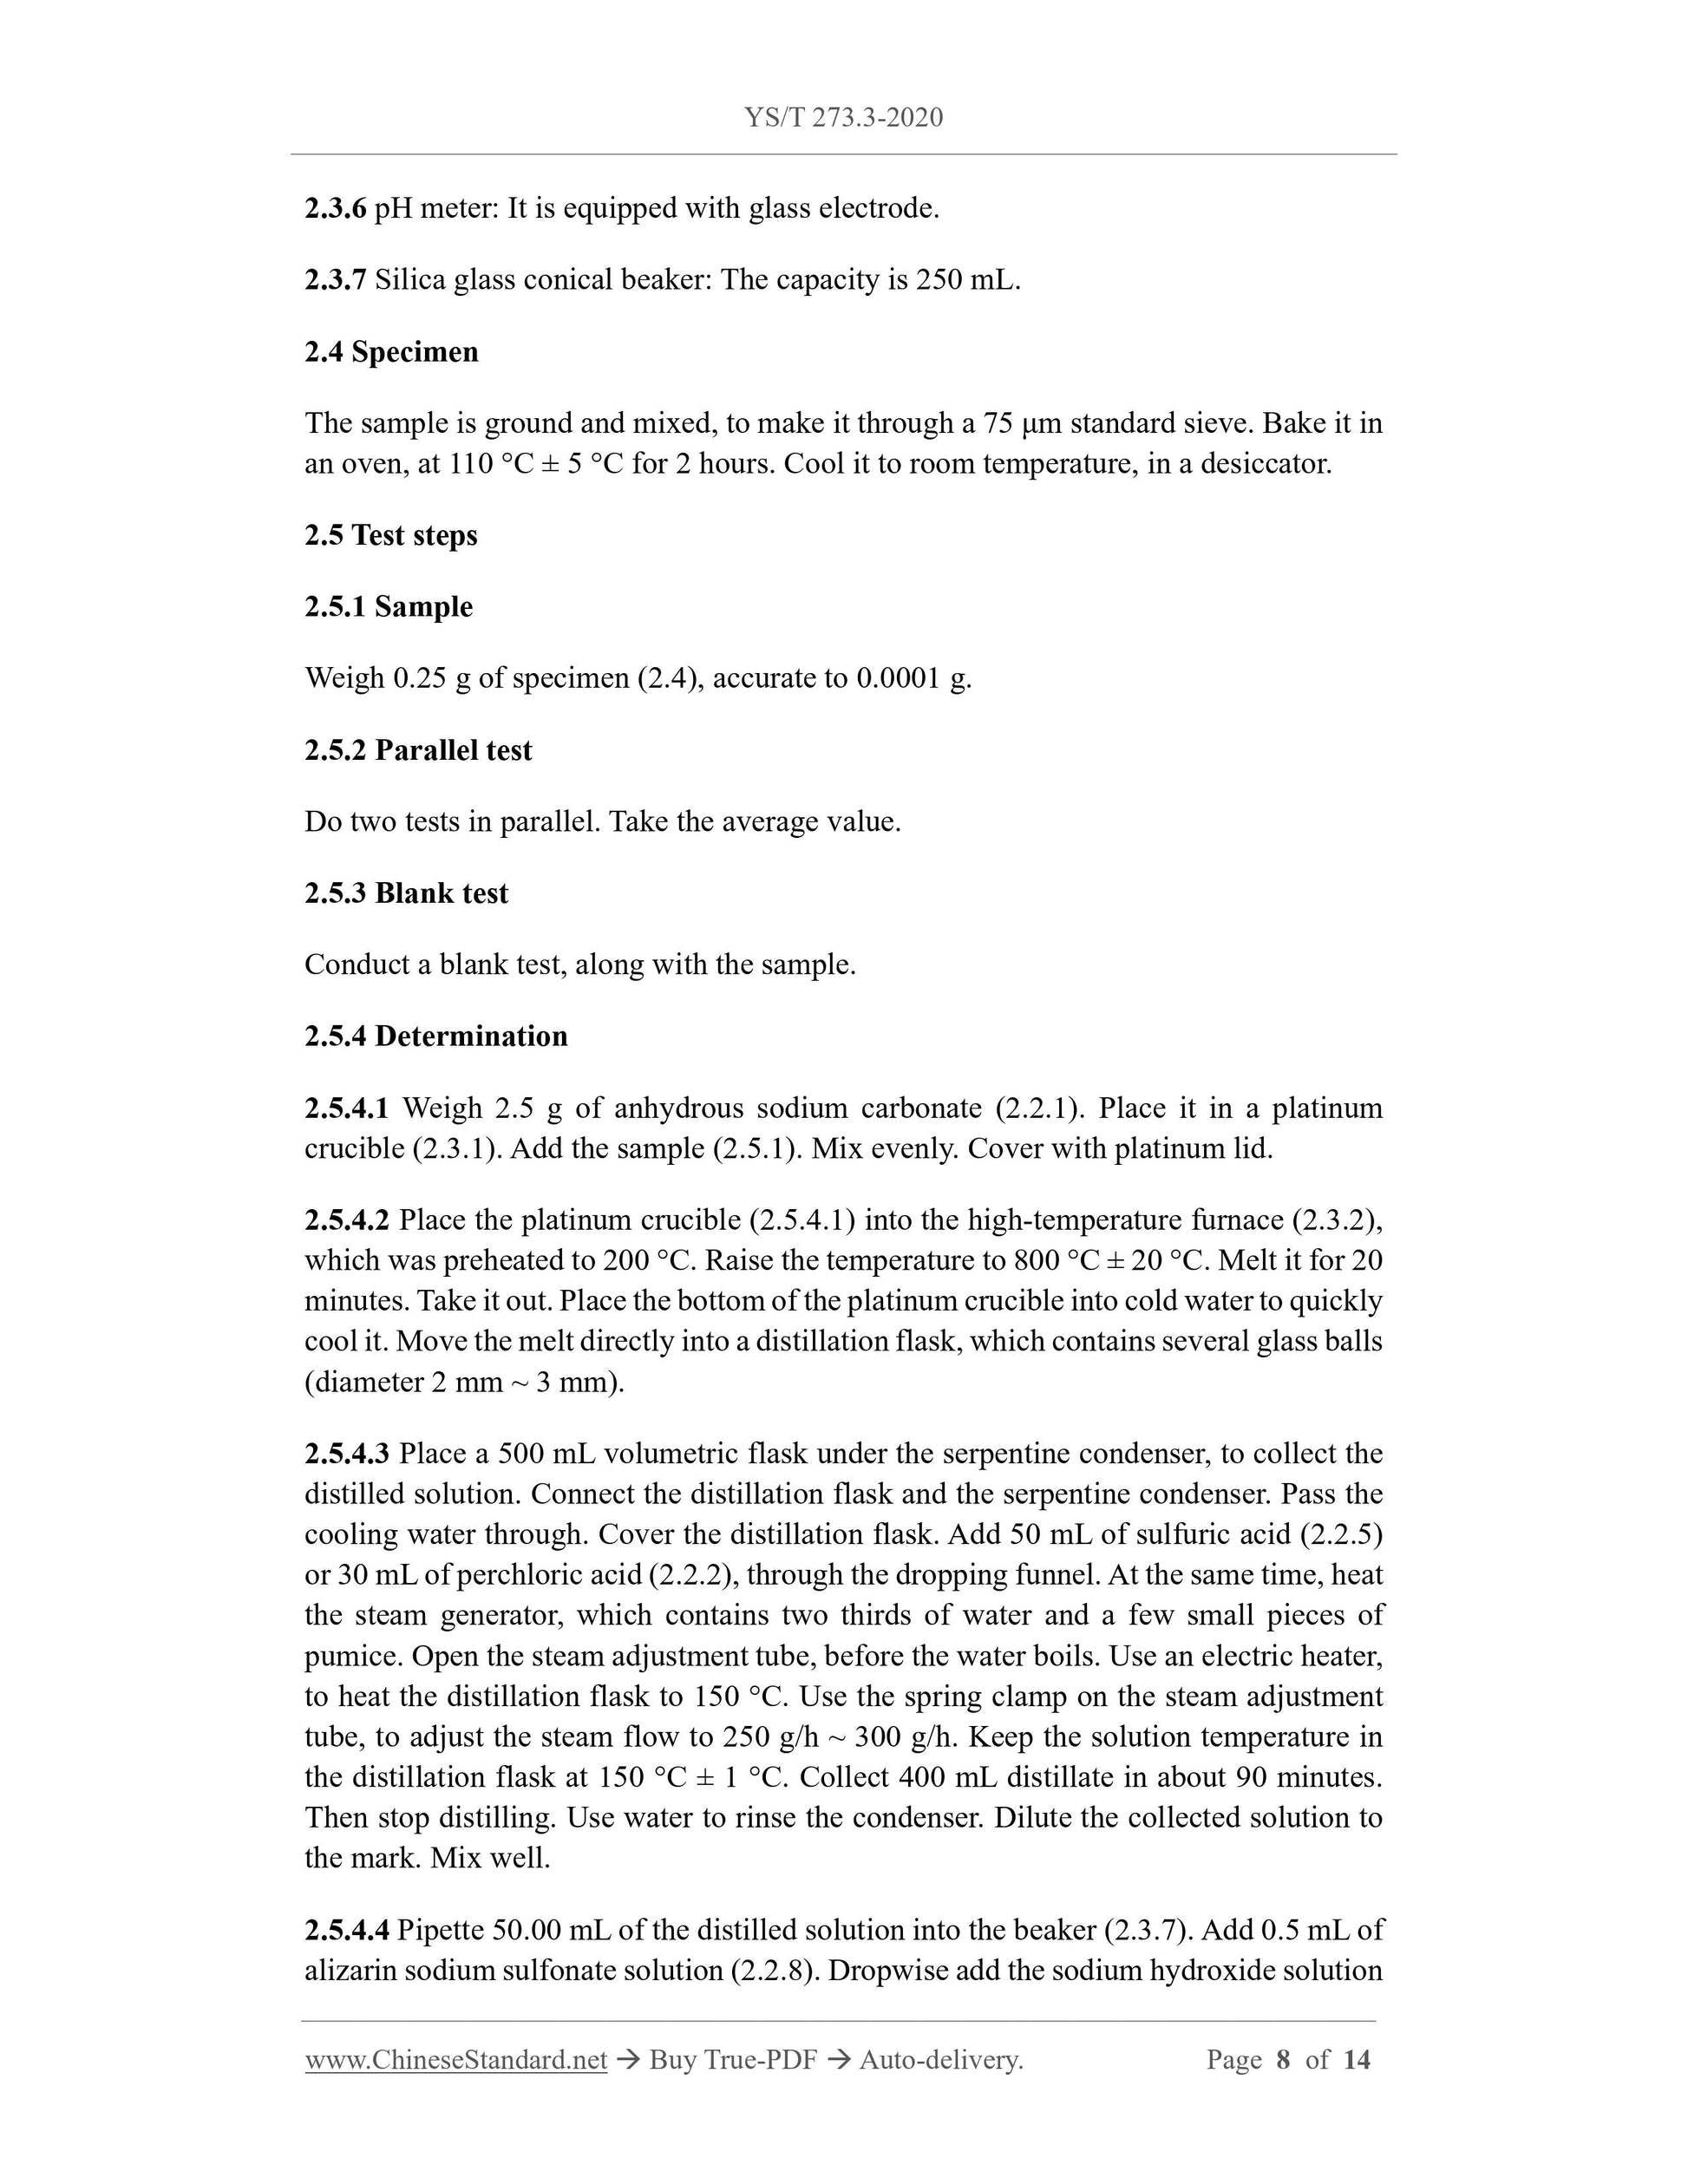 YS/T 273.3-2020 Page 5